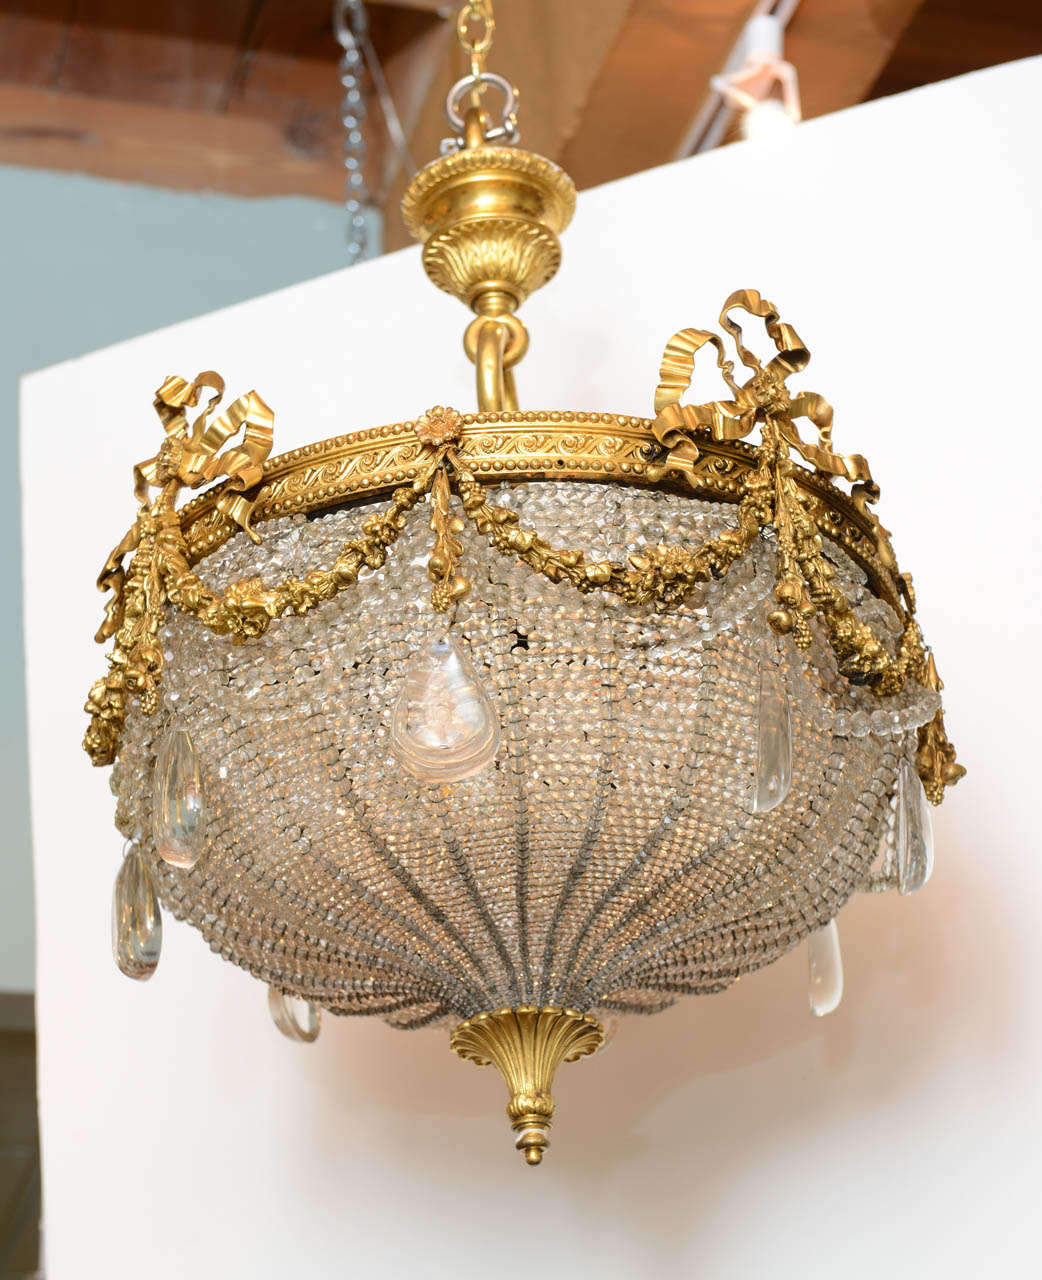 20th Century A Beautiful Gilt Bronze Ribboned and Wreath Beaded Chandelier by E. F. Caldwell